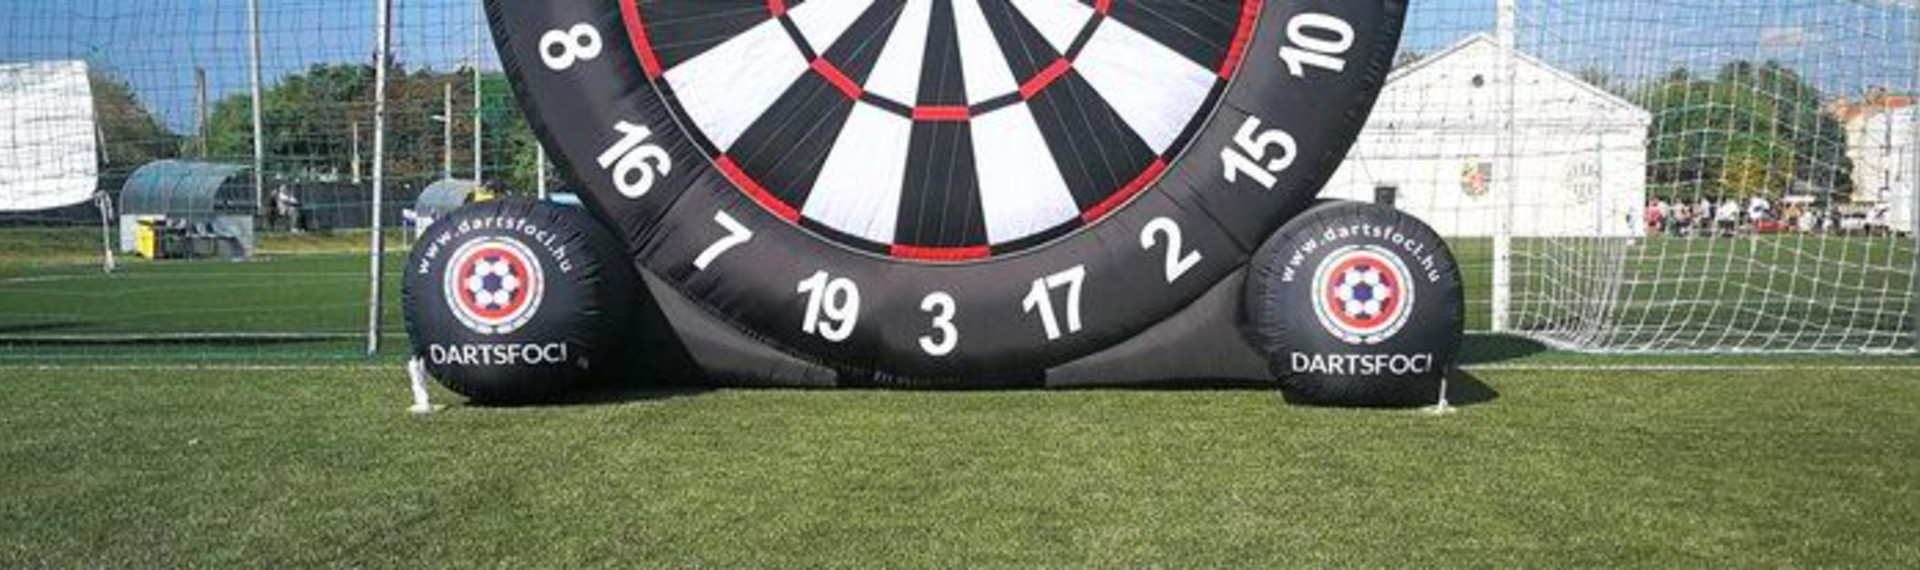 Football Darts in Stuttgart | Pissup | We are the Stag Do Experts